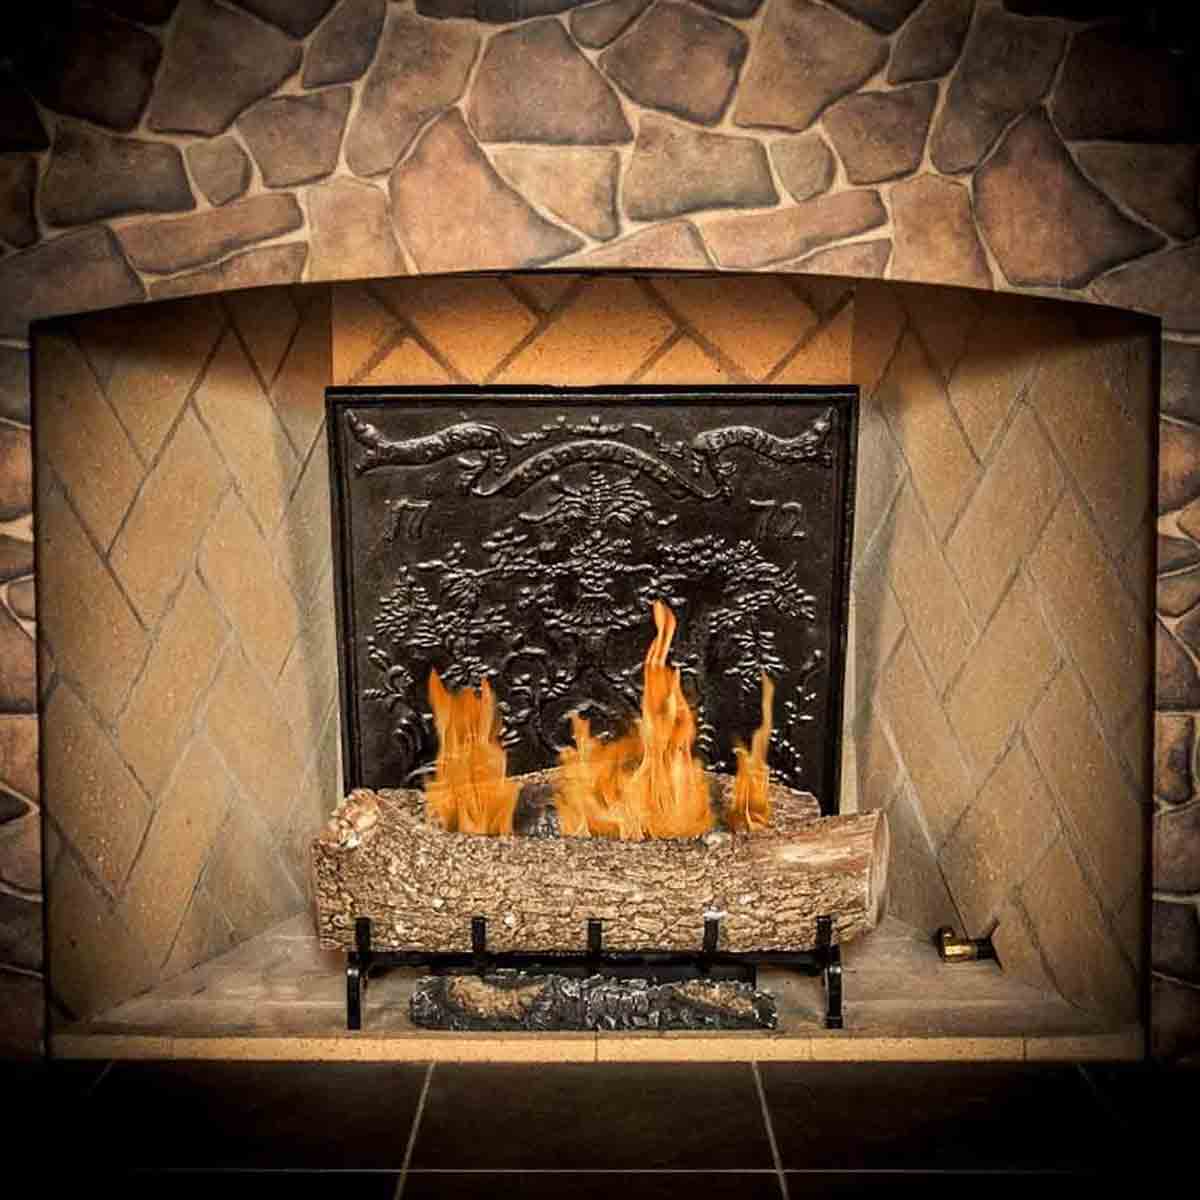 Reasons to Add a Fireback to Your Fireplace